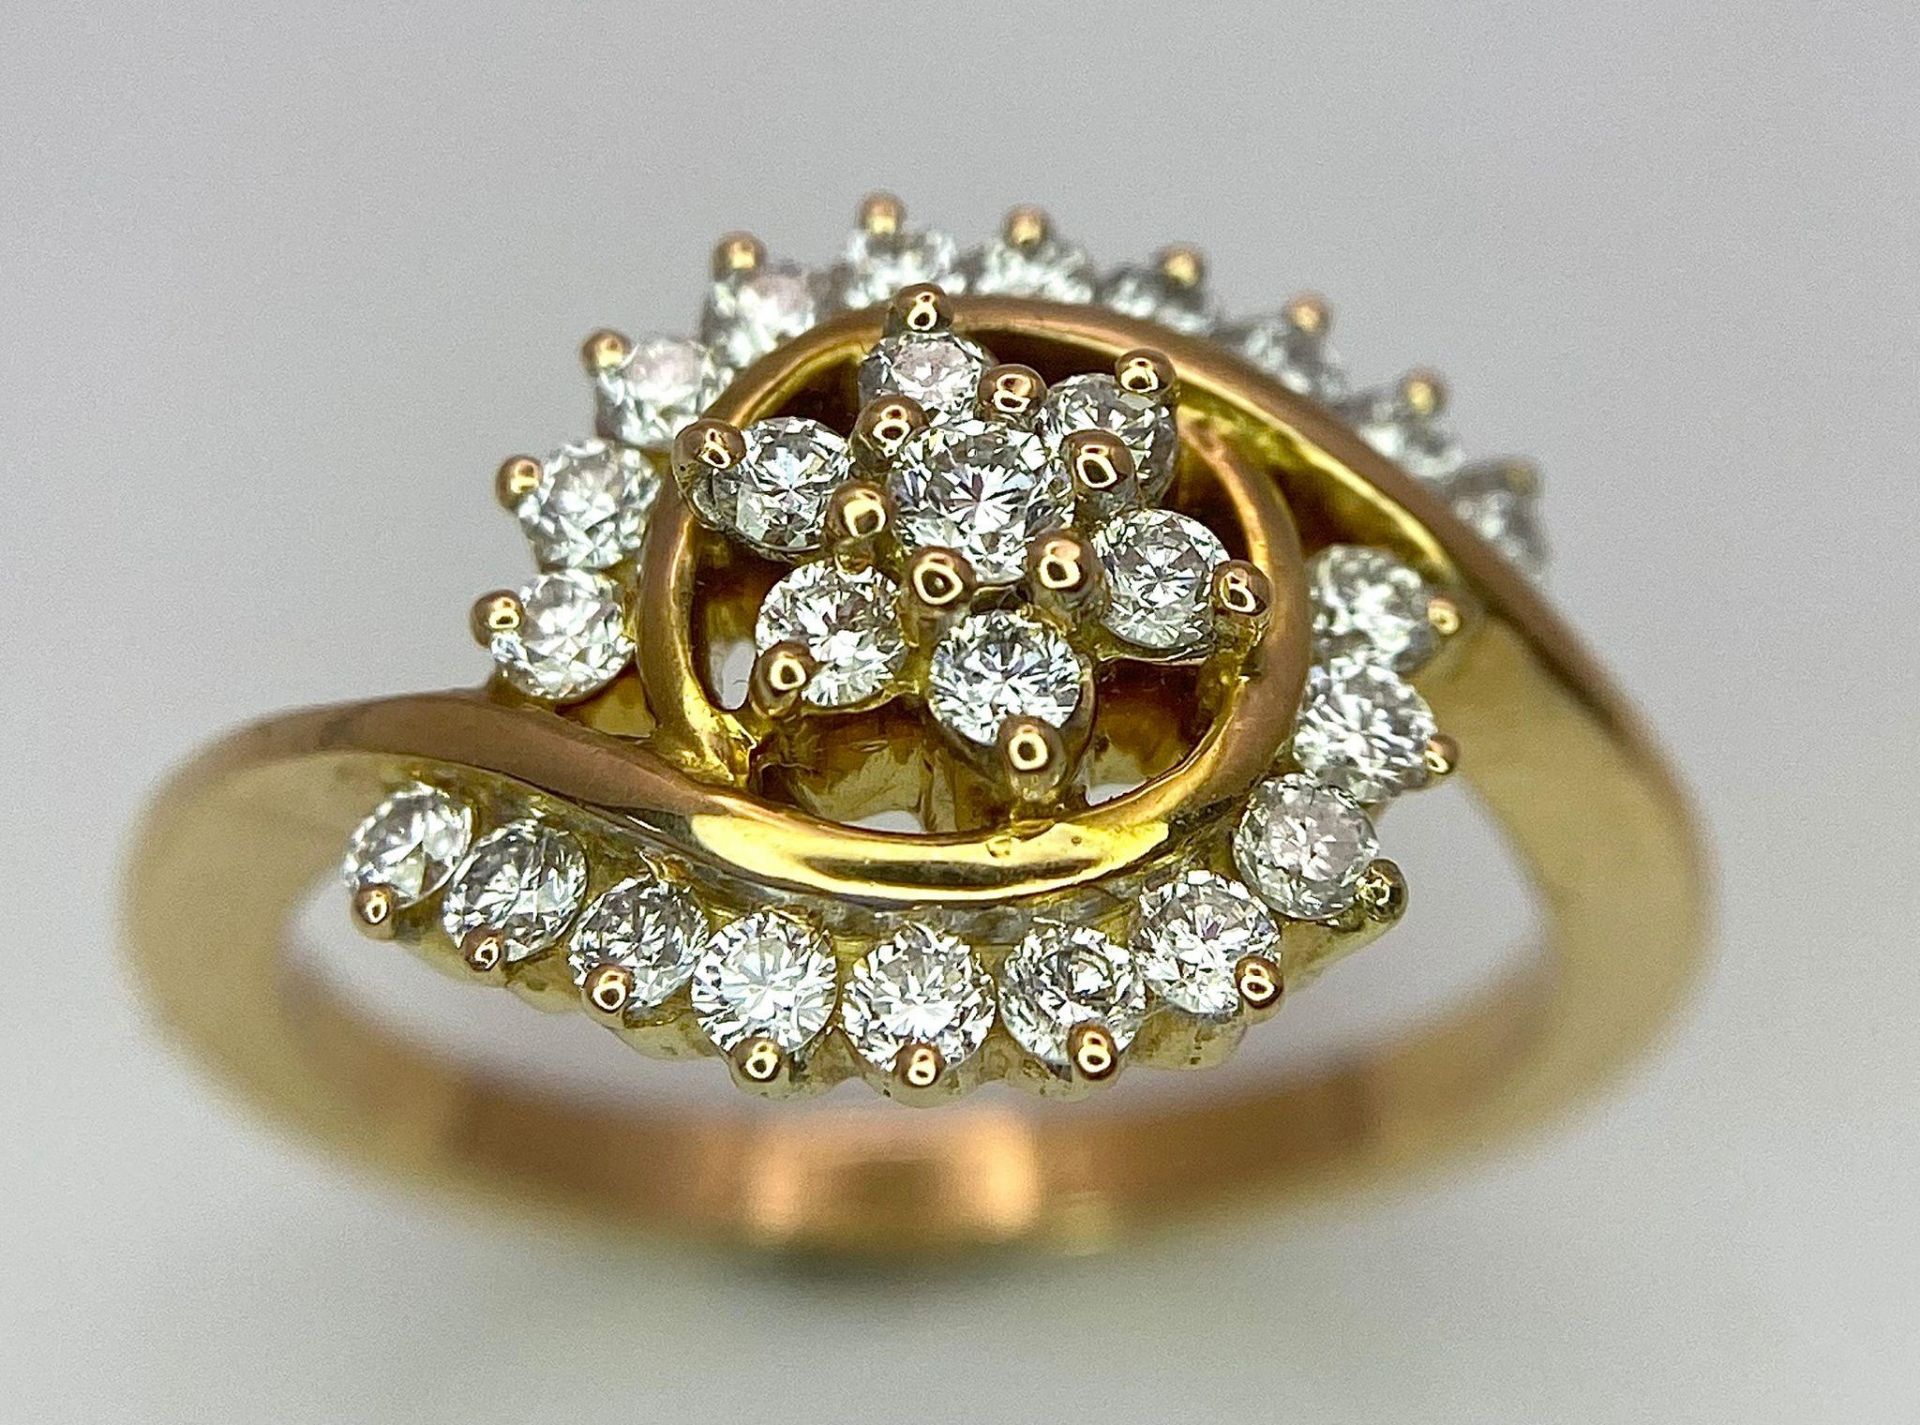 An attractive 14K Yellow Gold (tested as) Diamond Swirl Ring, 0.55ct diamond weight, 4.6g total - Image 3 of 6